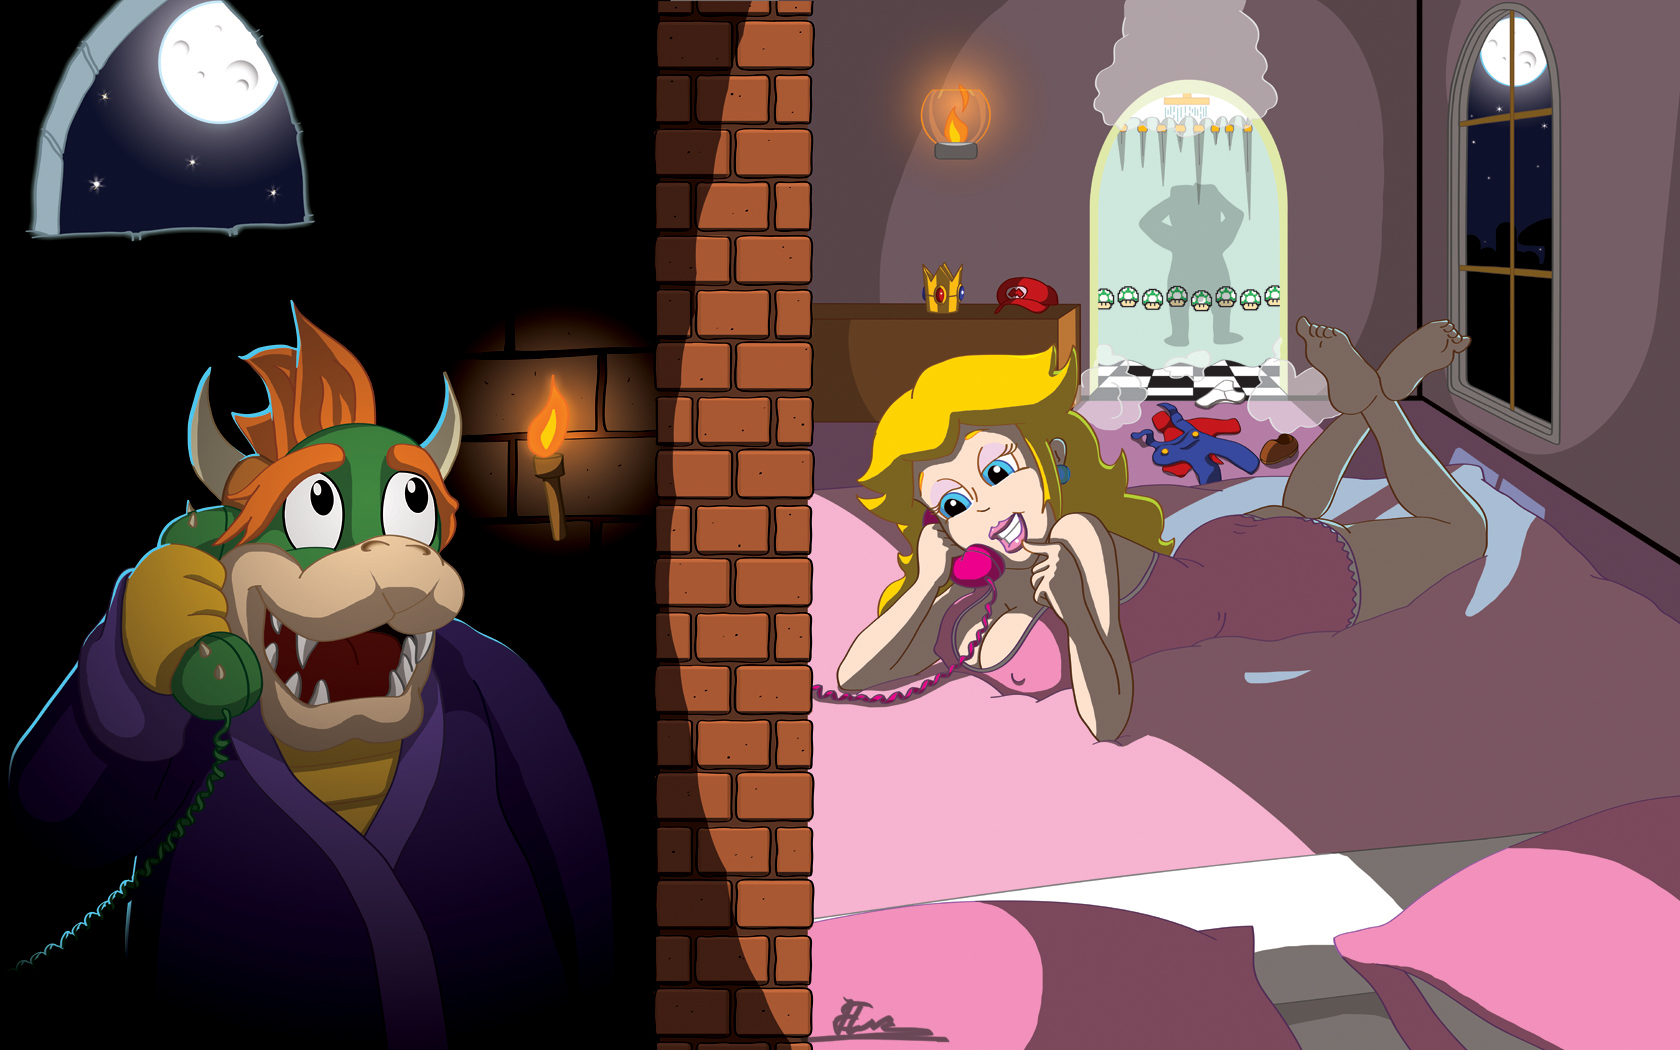 Peach's Untold Tale is probably the best Nintendo sex game that